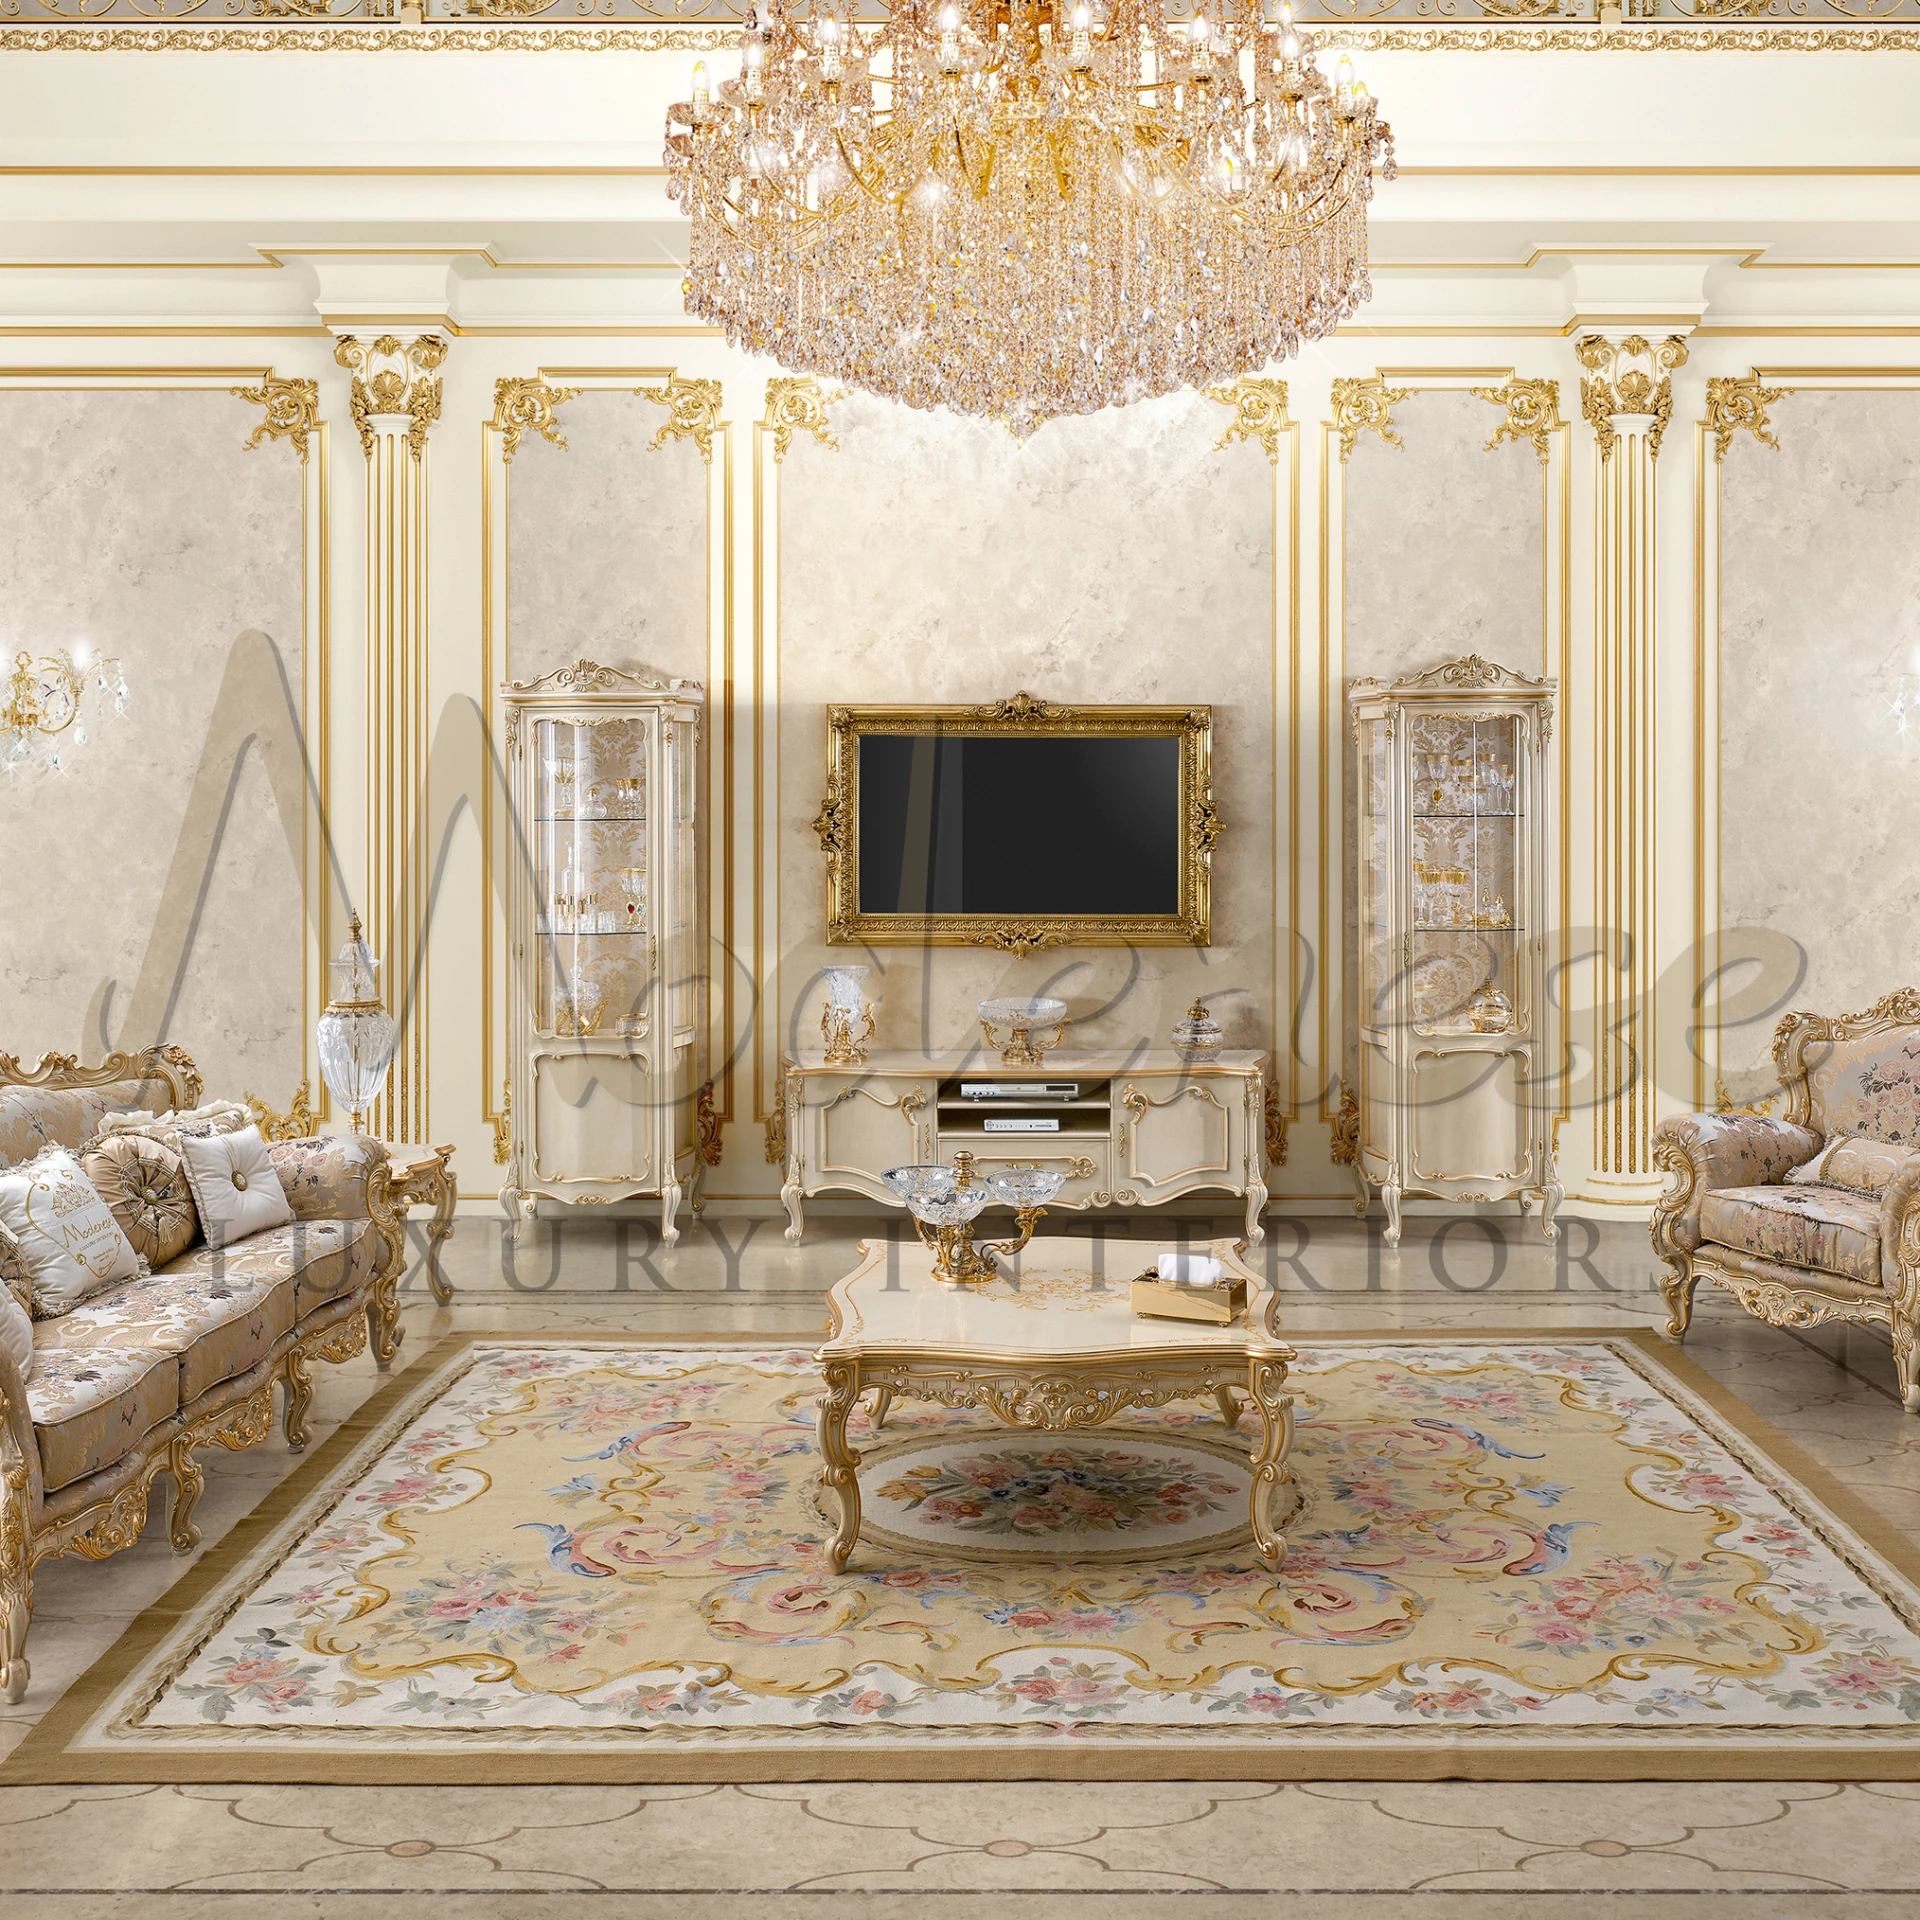 Luxurious grand living room with complex gold-trimmed furniture and a large crystal chandelier